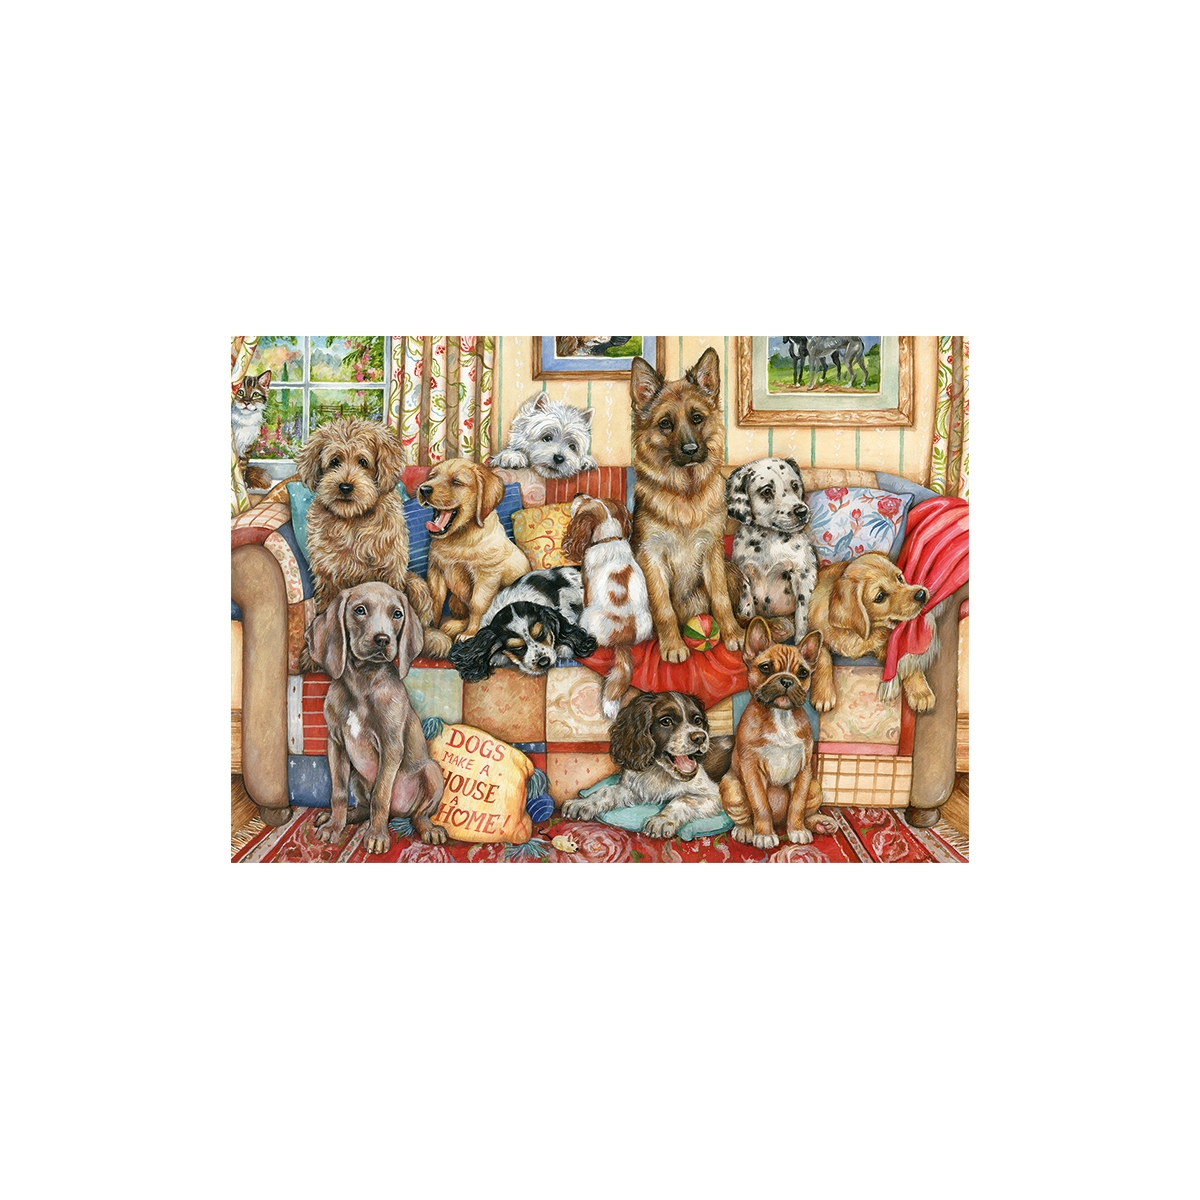 FALCON Jumbo Teile Mehrfarben Couch-1000 11293 Zubehör, Dog The Gathering Puzzle on